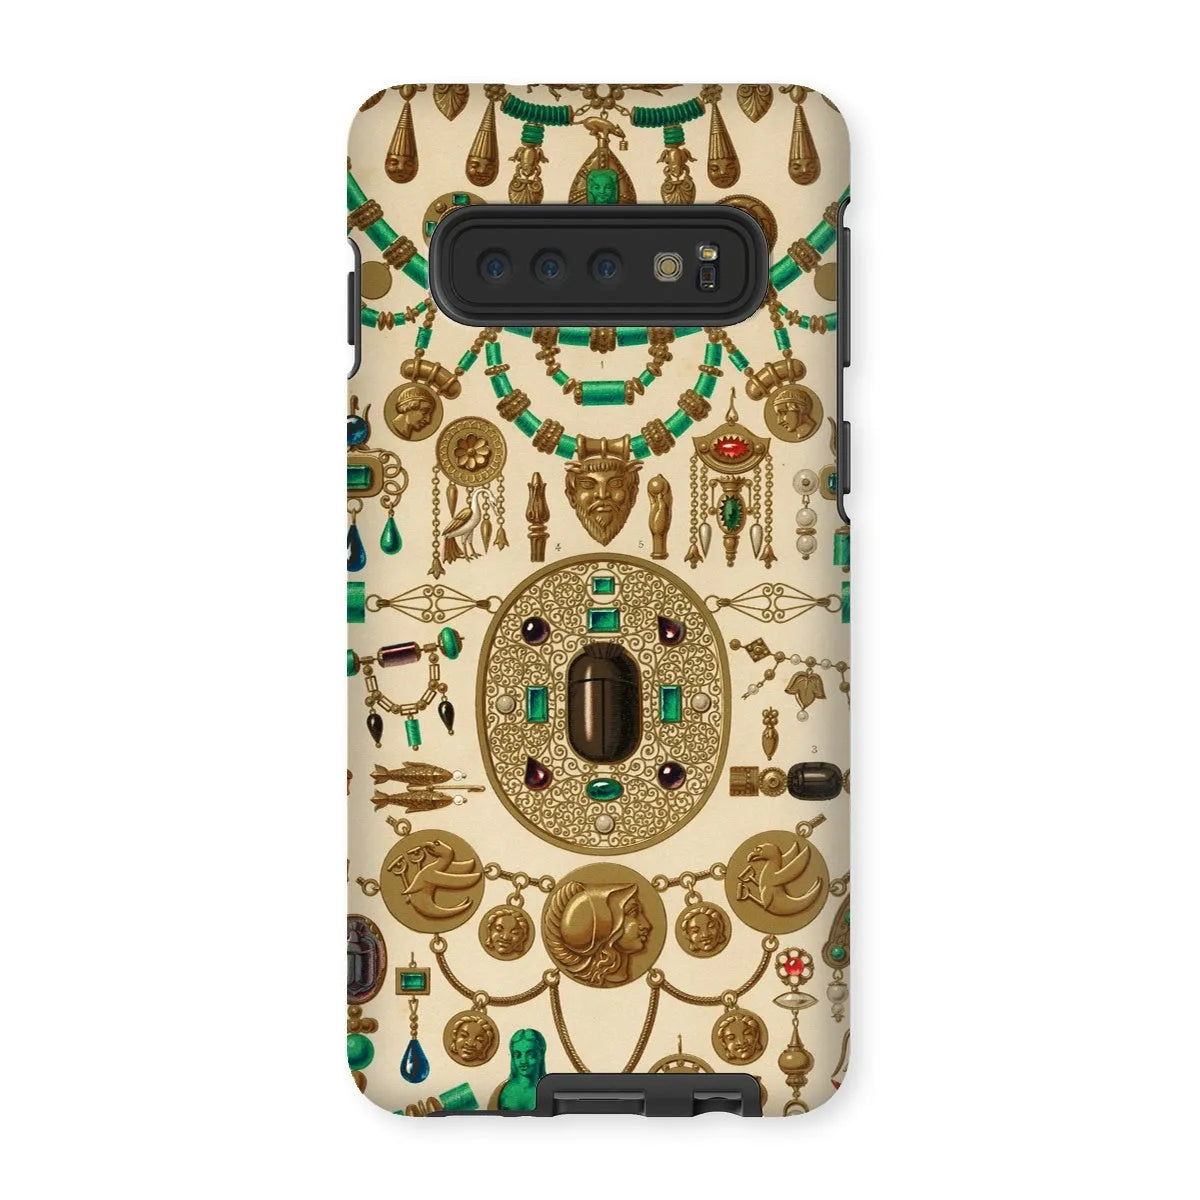 Etruscan Patterns From L’ornement Polychrome By Auguste Racinet Tough Phone Case - Samsung Galaxy S10 / Matte